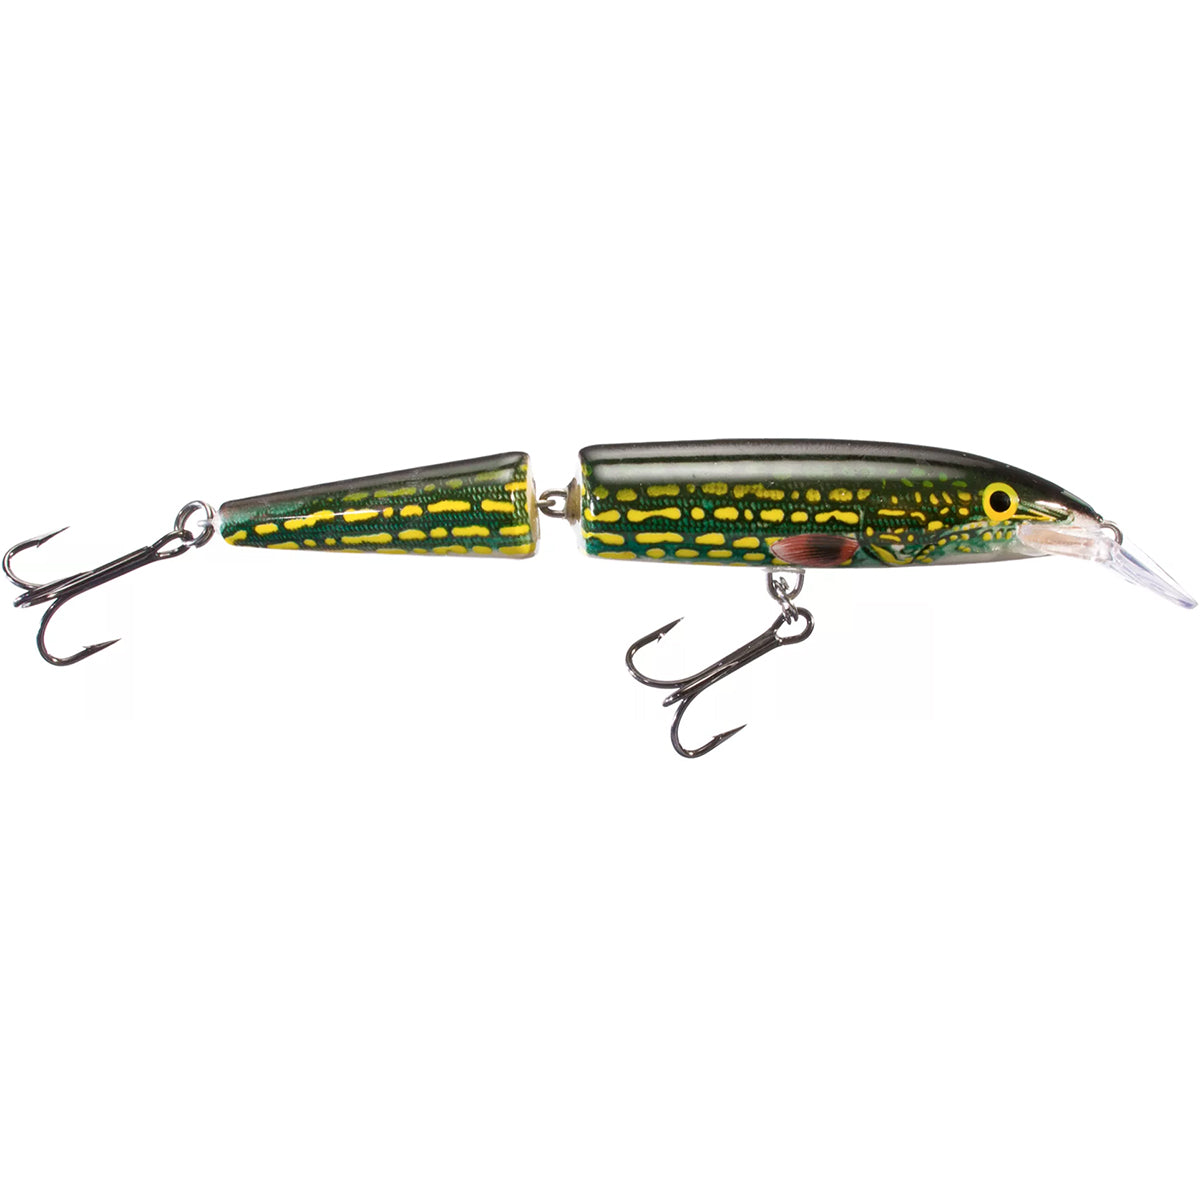 Rapala Jointed 9 3 1/2 Pike